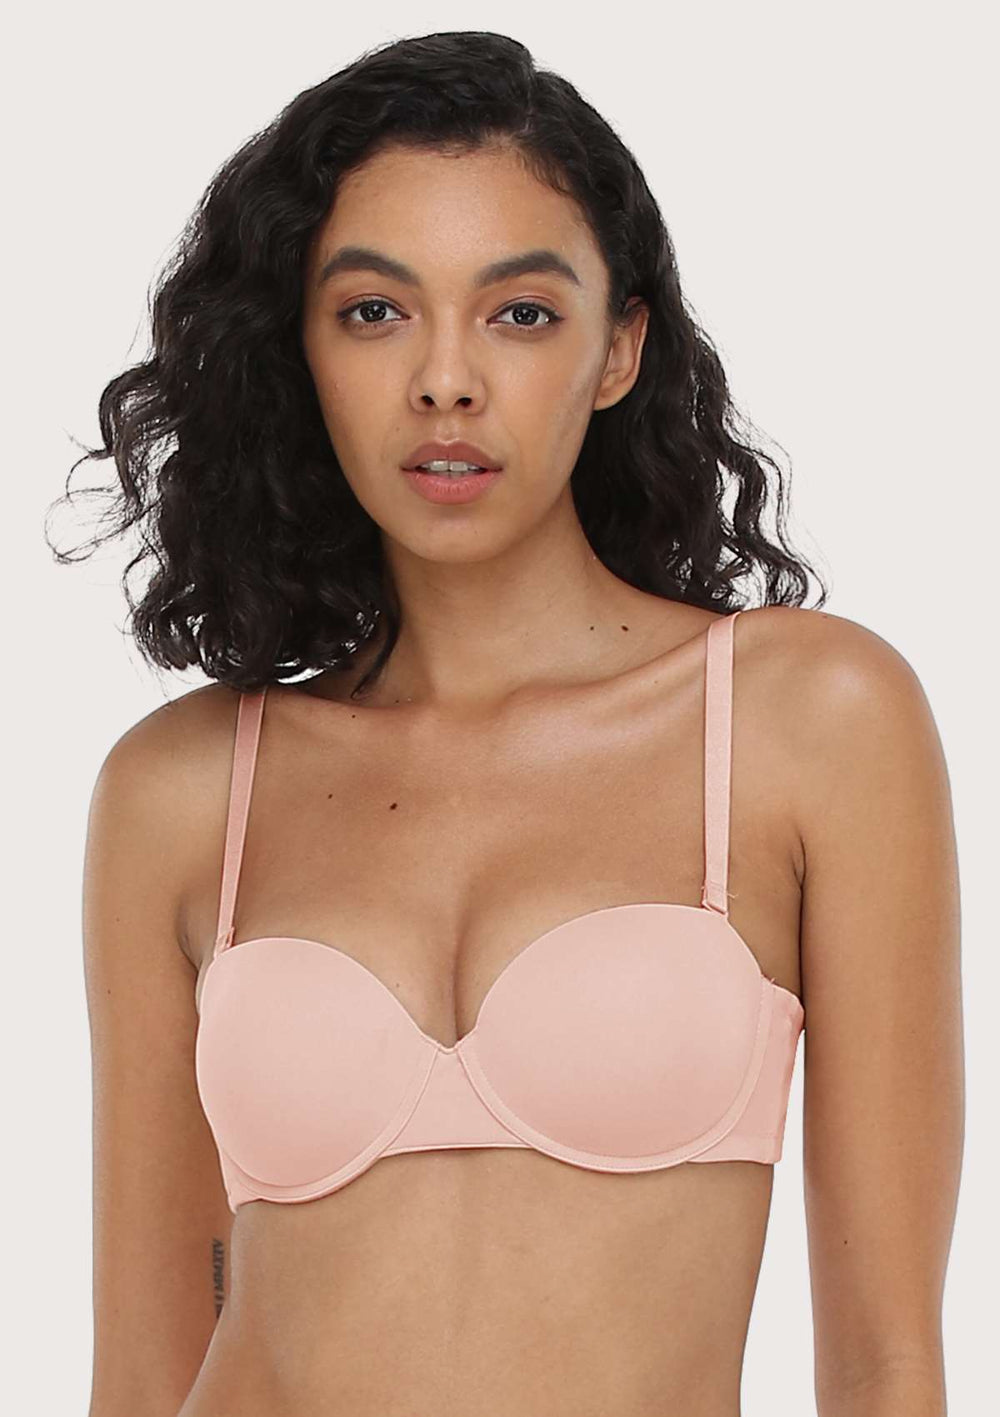 Strapless Bra For Small Busts | MVP Multiway Strapless